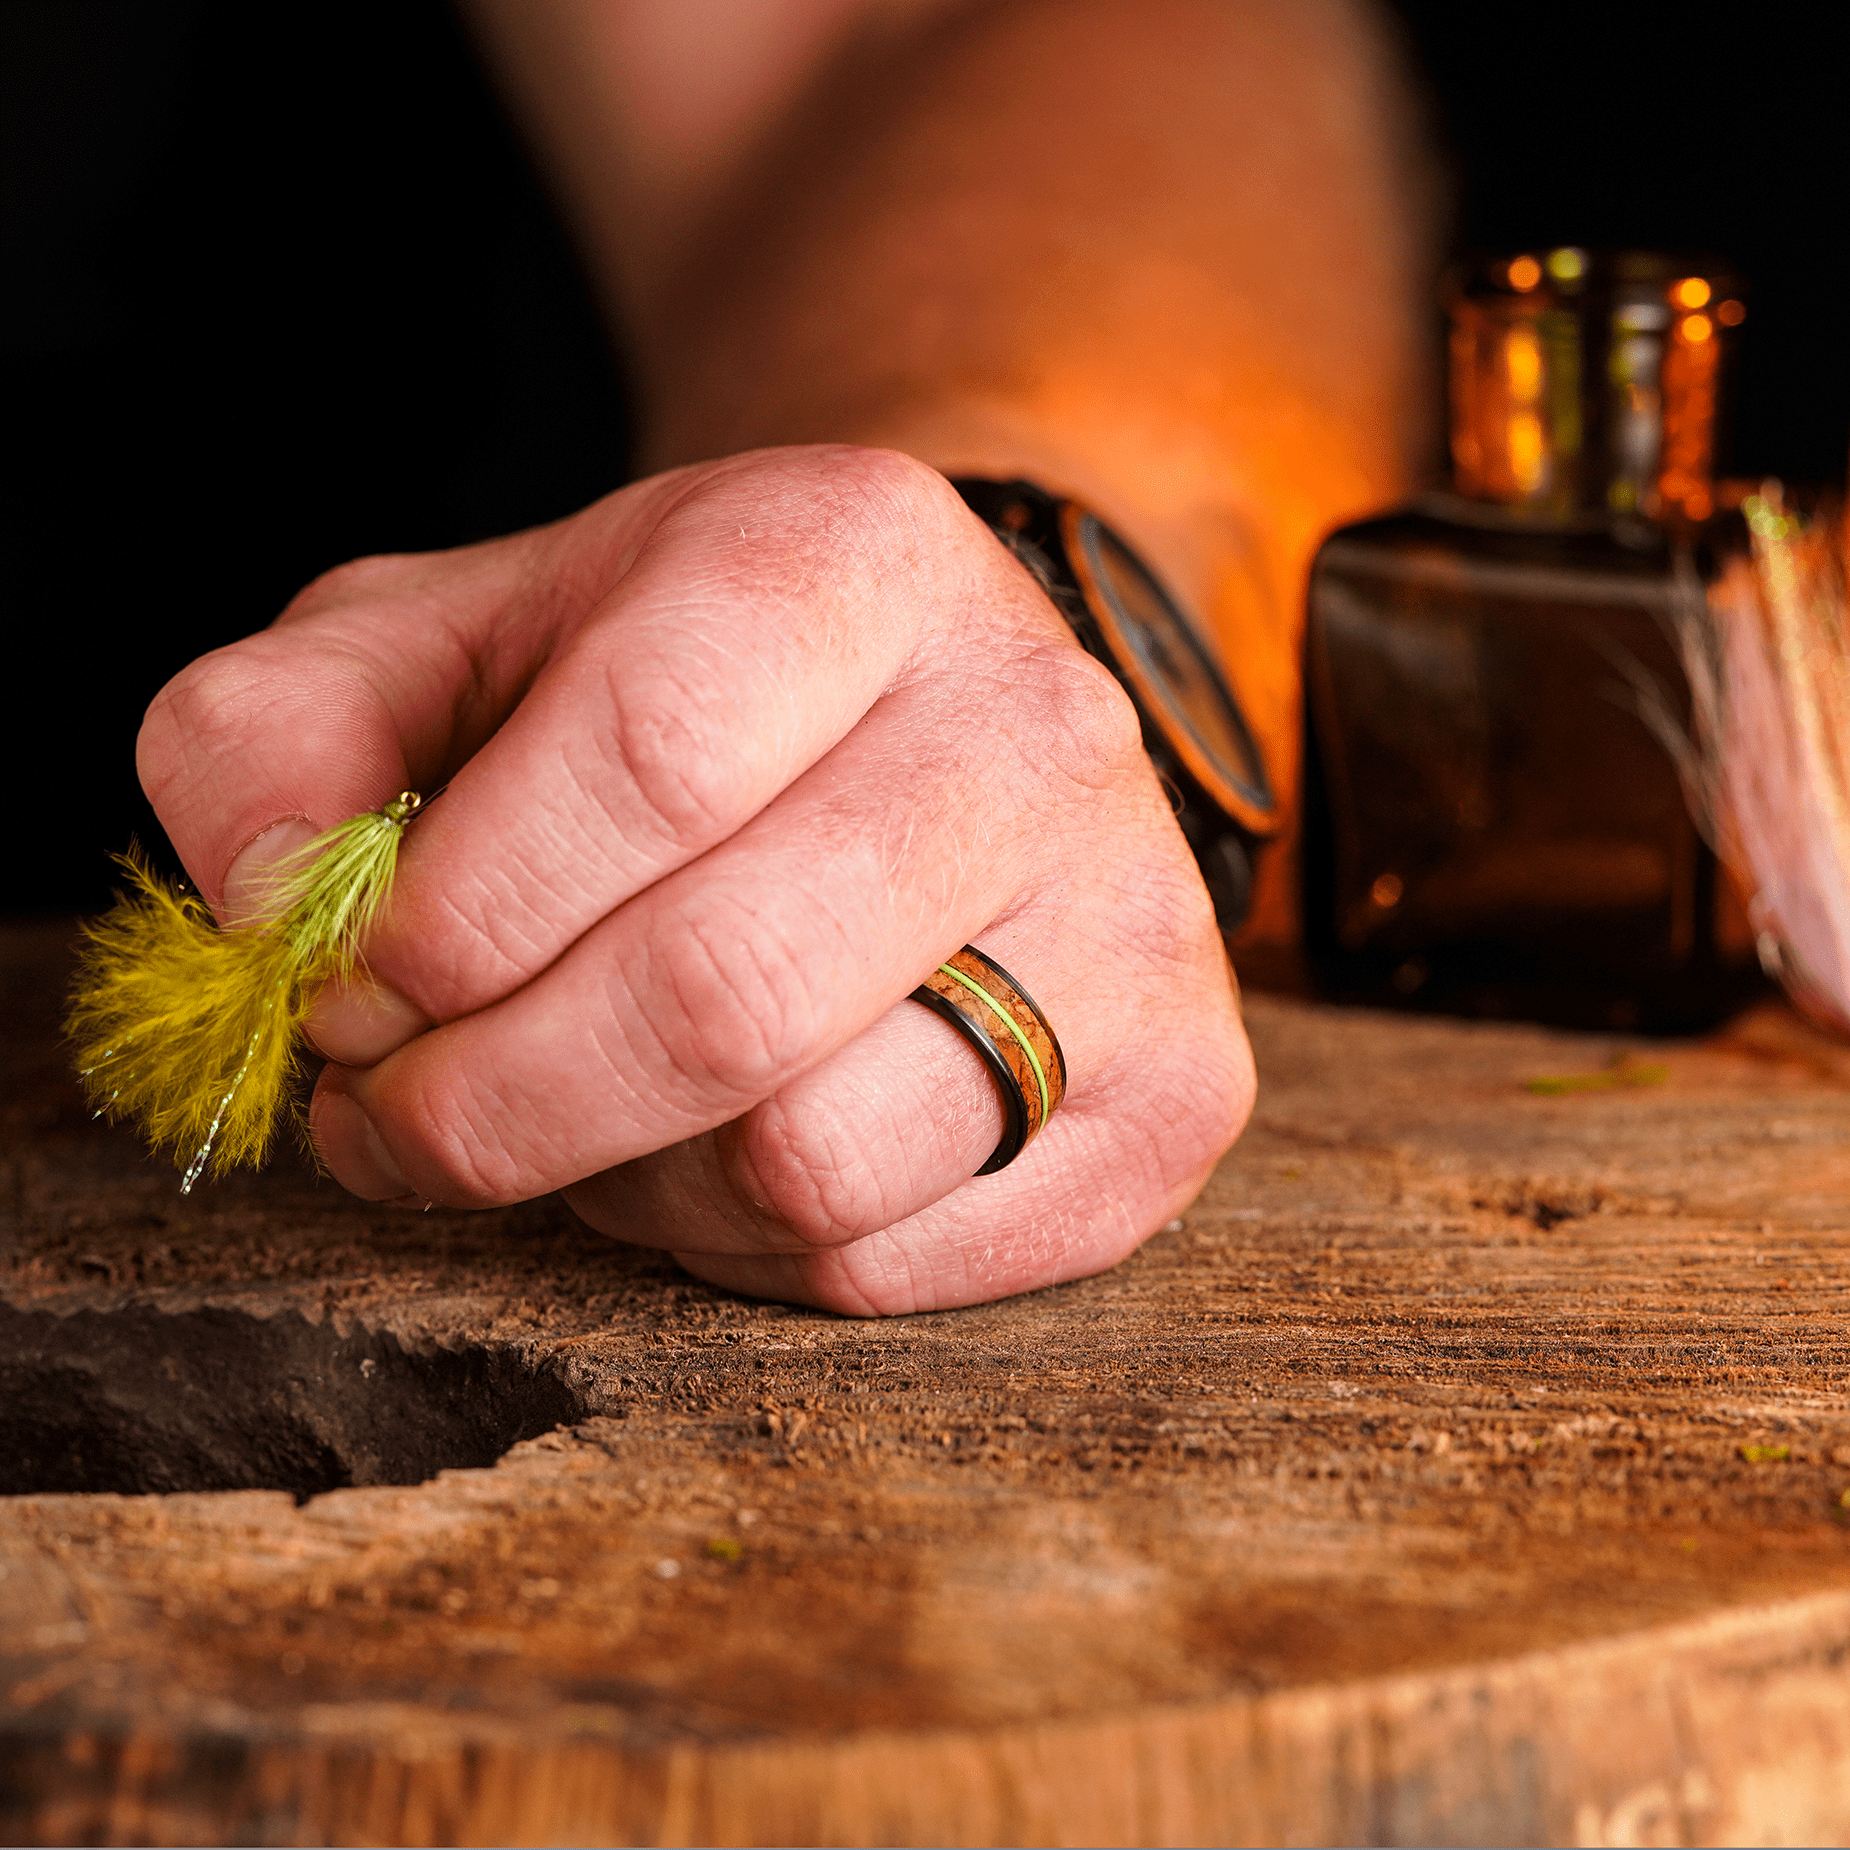 The Skipper - Men's Wedding Rings - Manly Bands